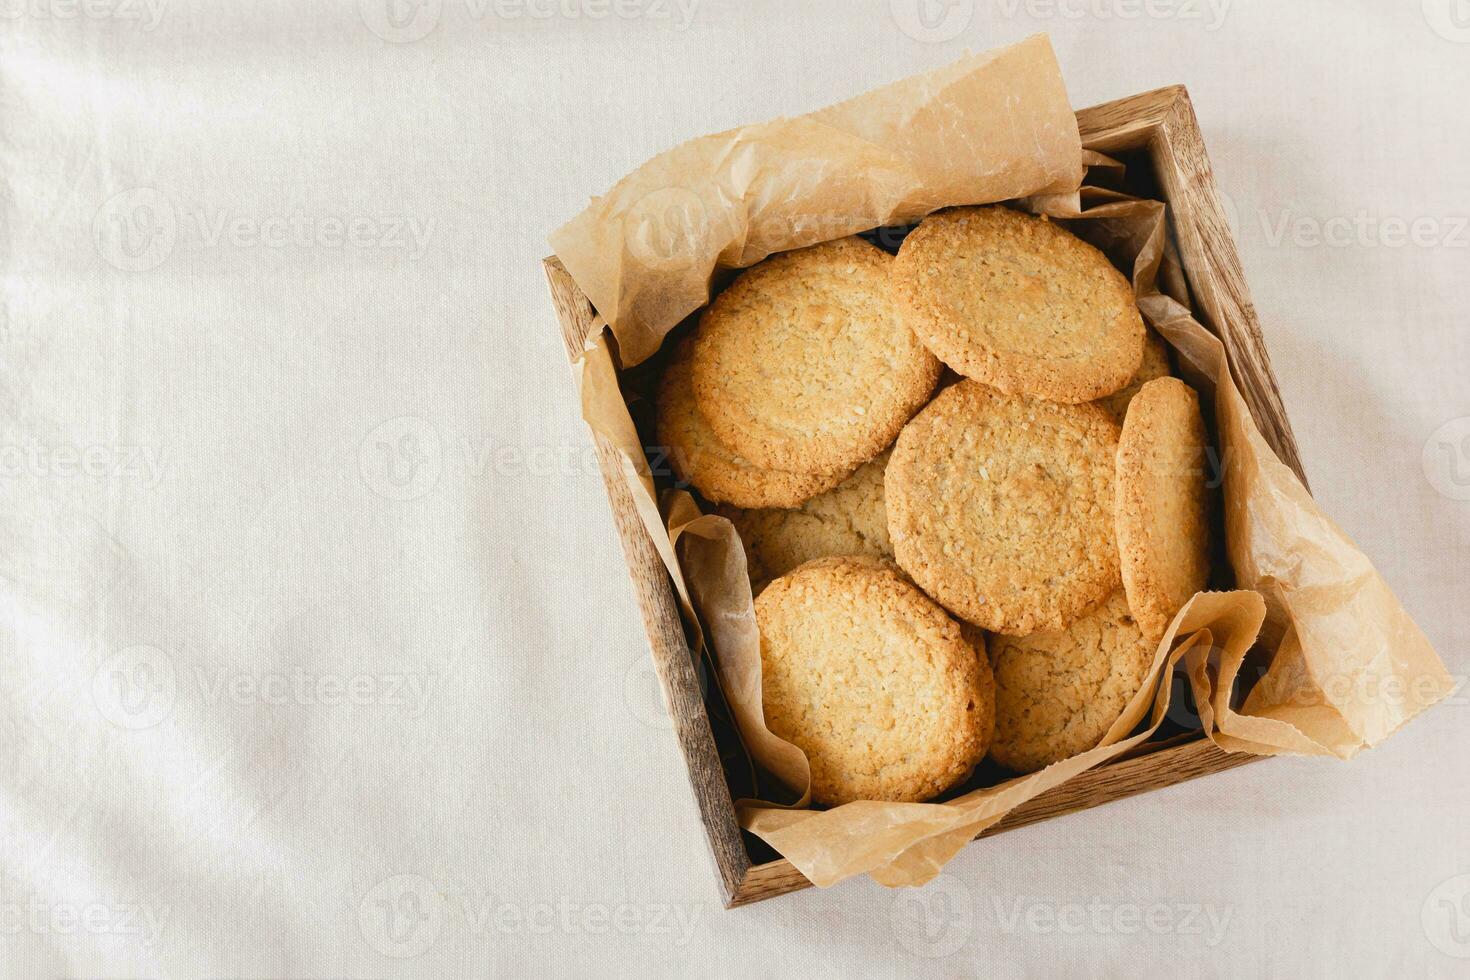 Oatmeal cookies on a wooden crate photo